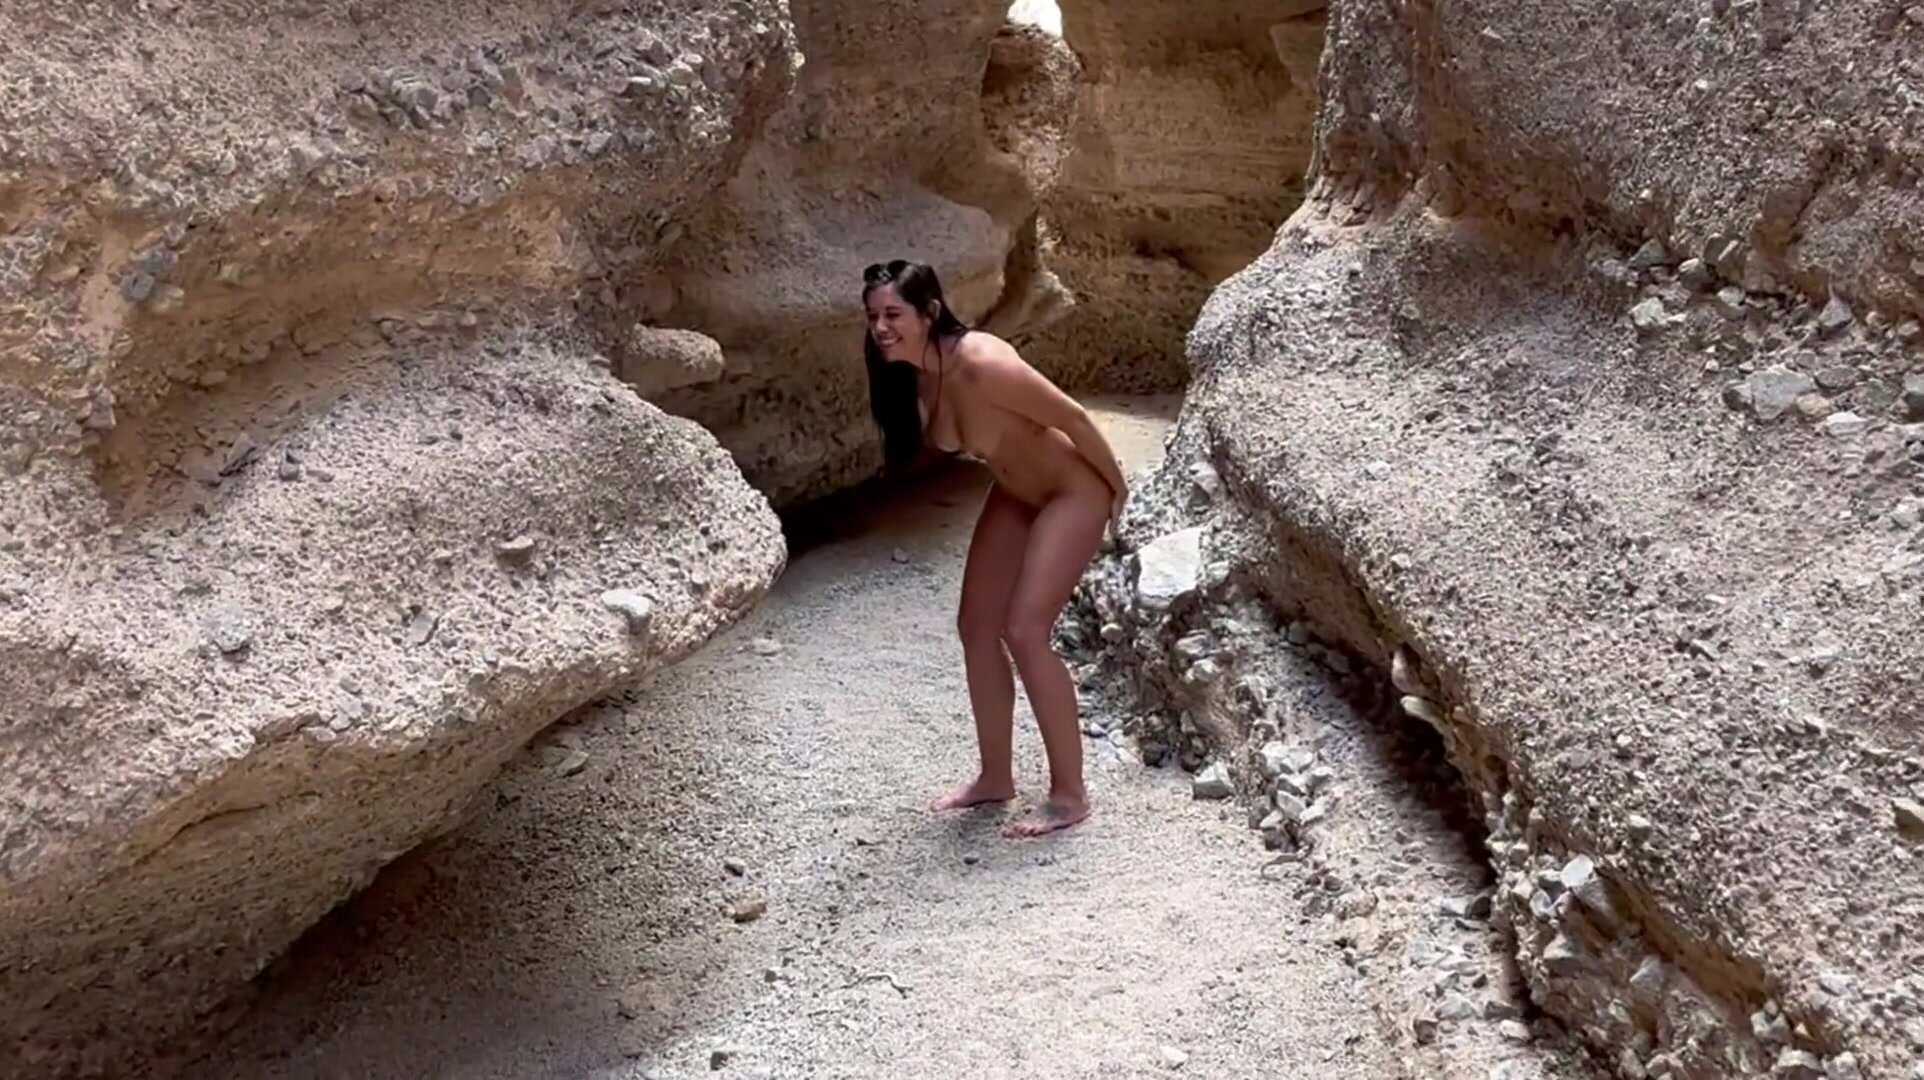 When doing an outdoor nude photoshoot, check the rocks you sit on for cactus thorns first!!